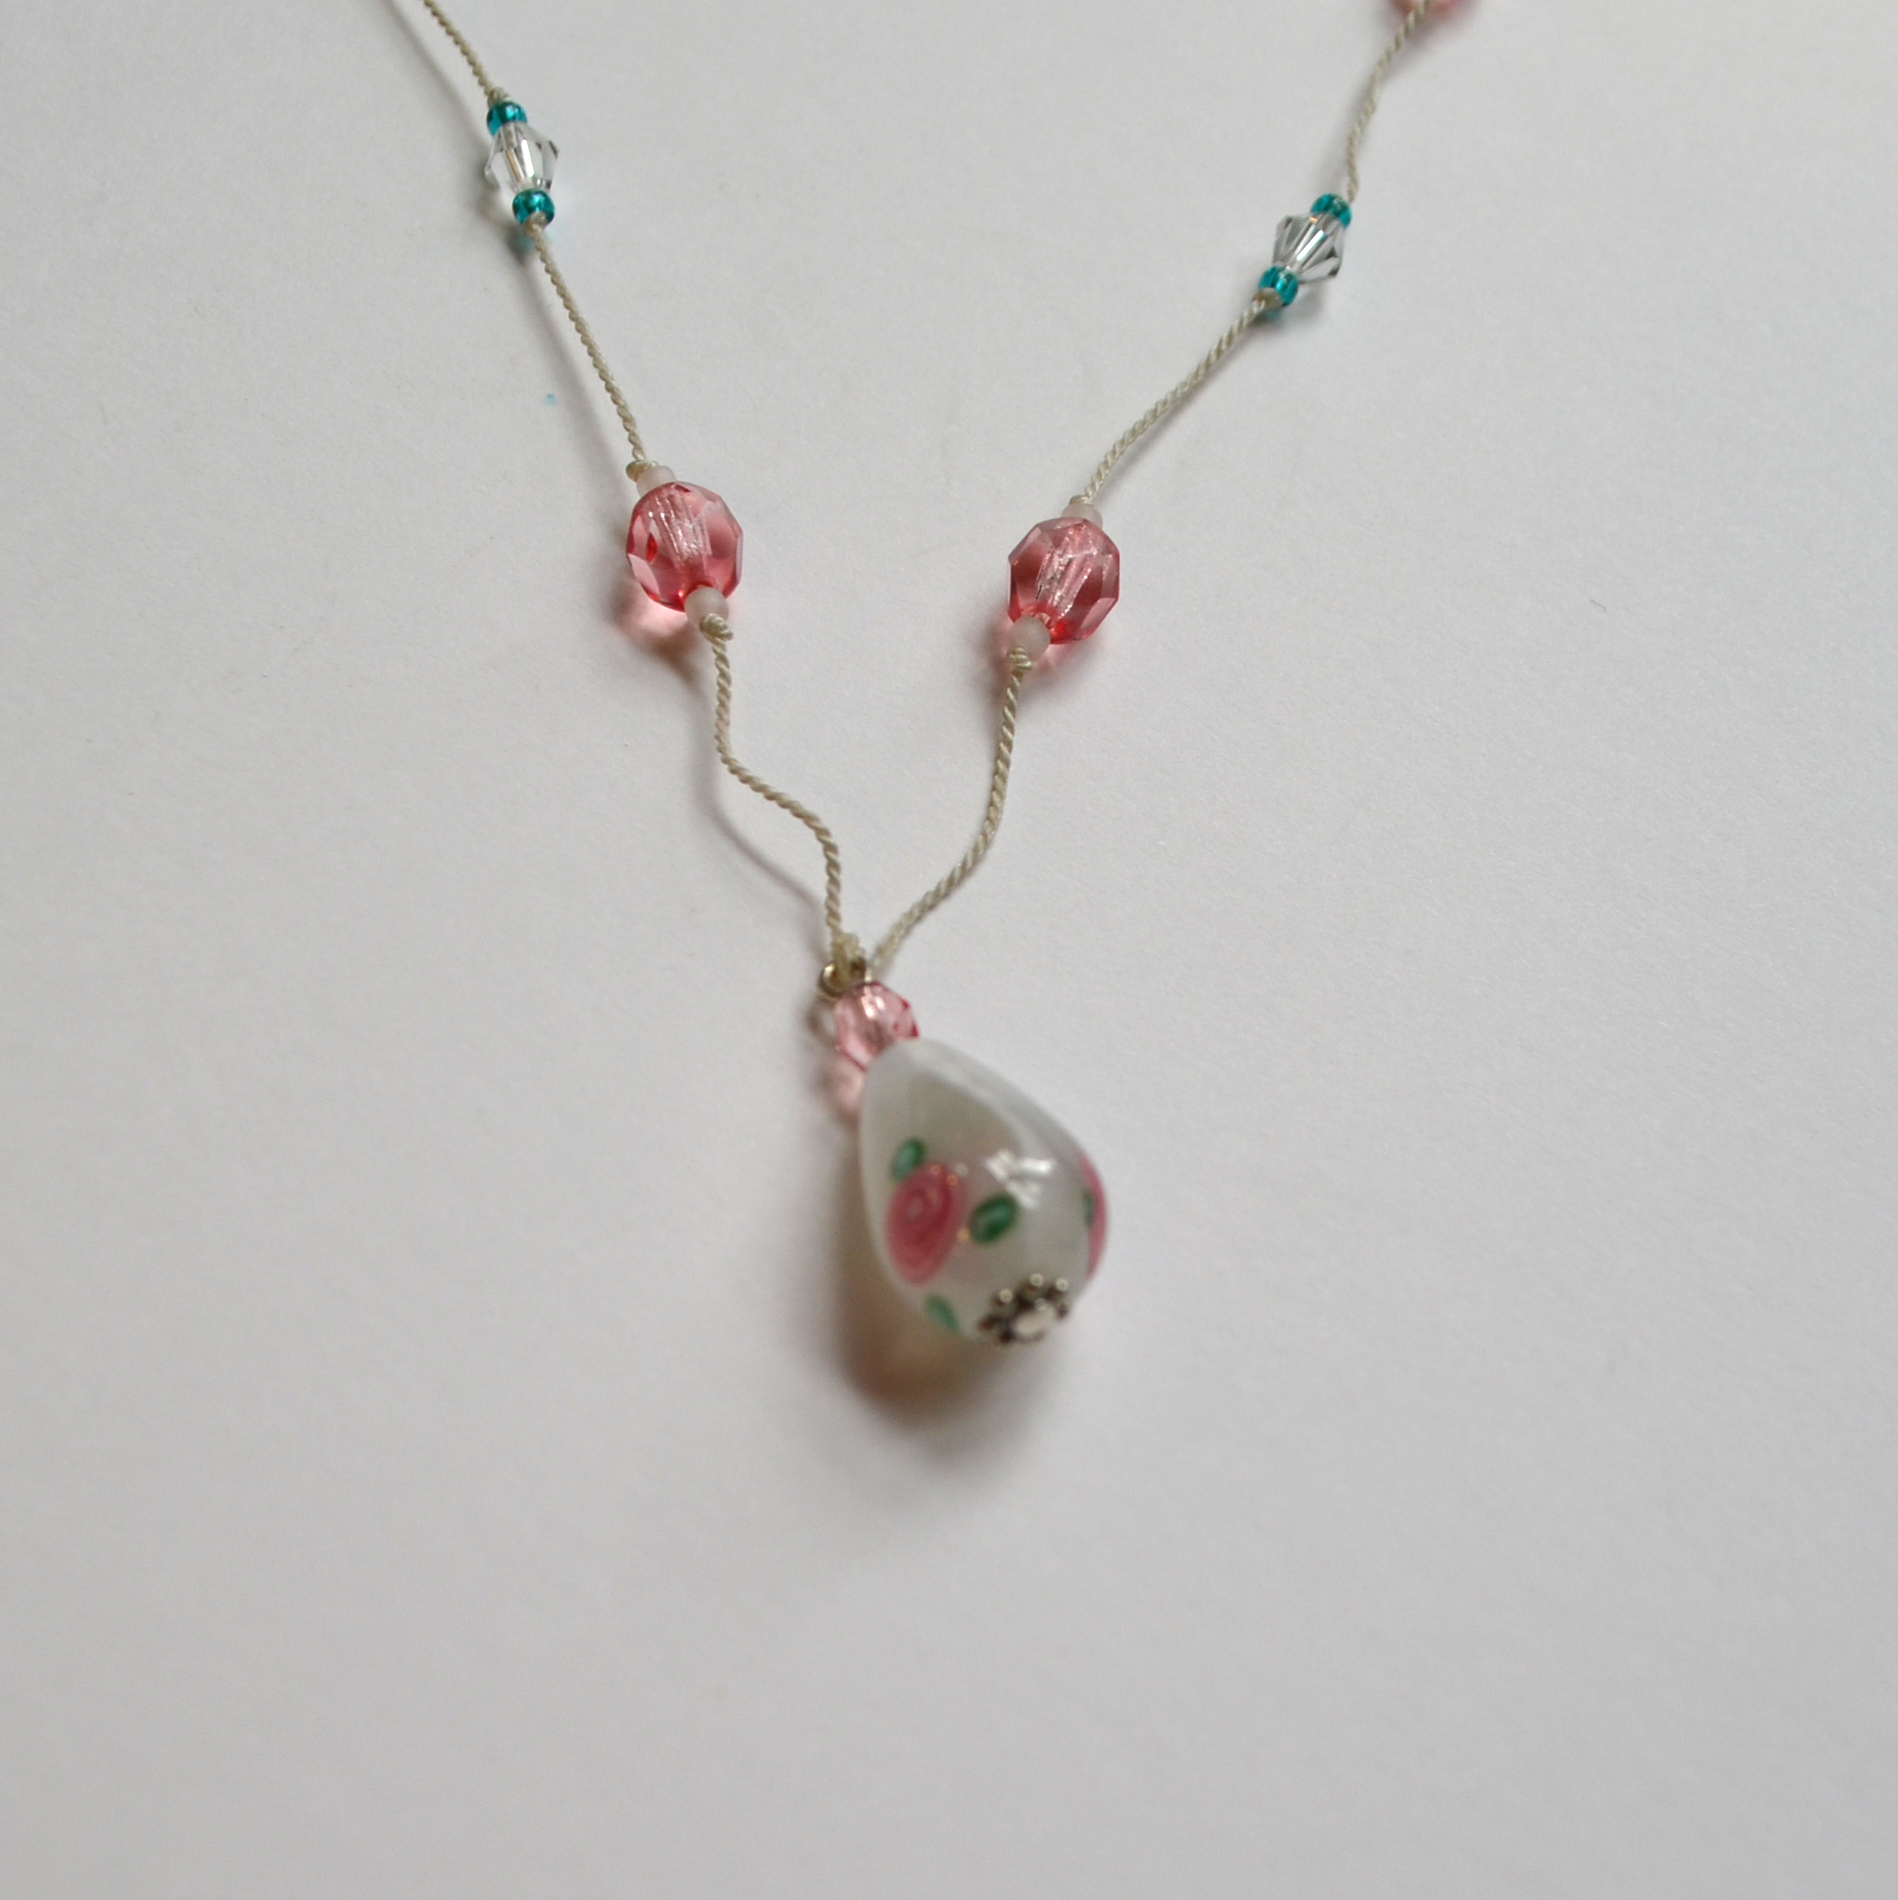 Delicate necklace by Judy Phillips